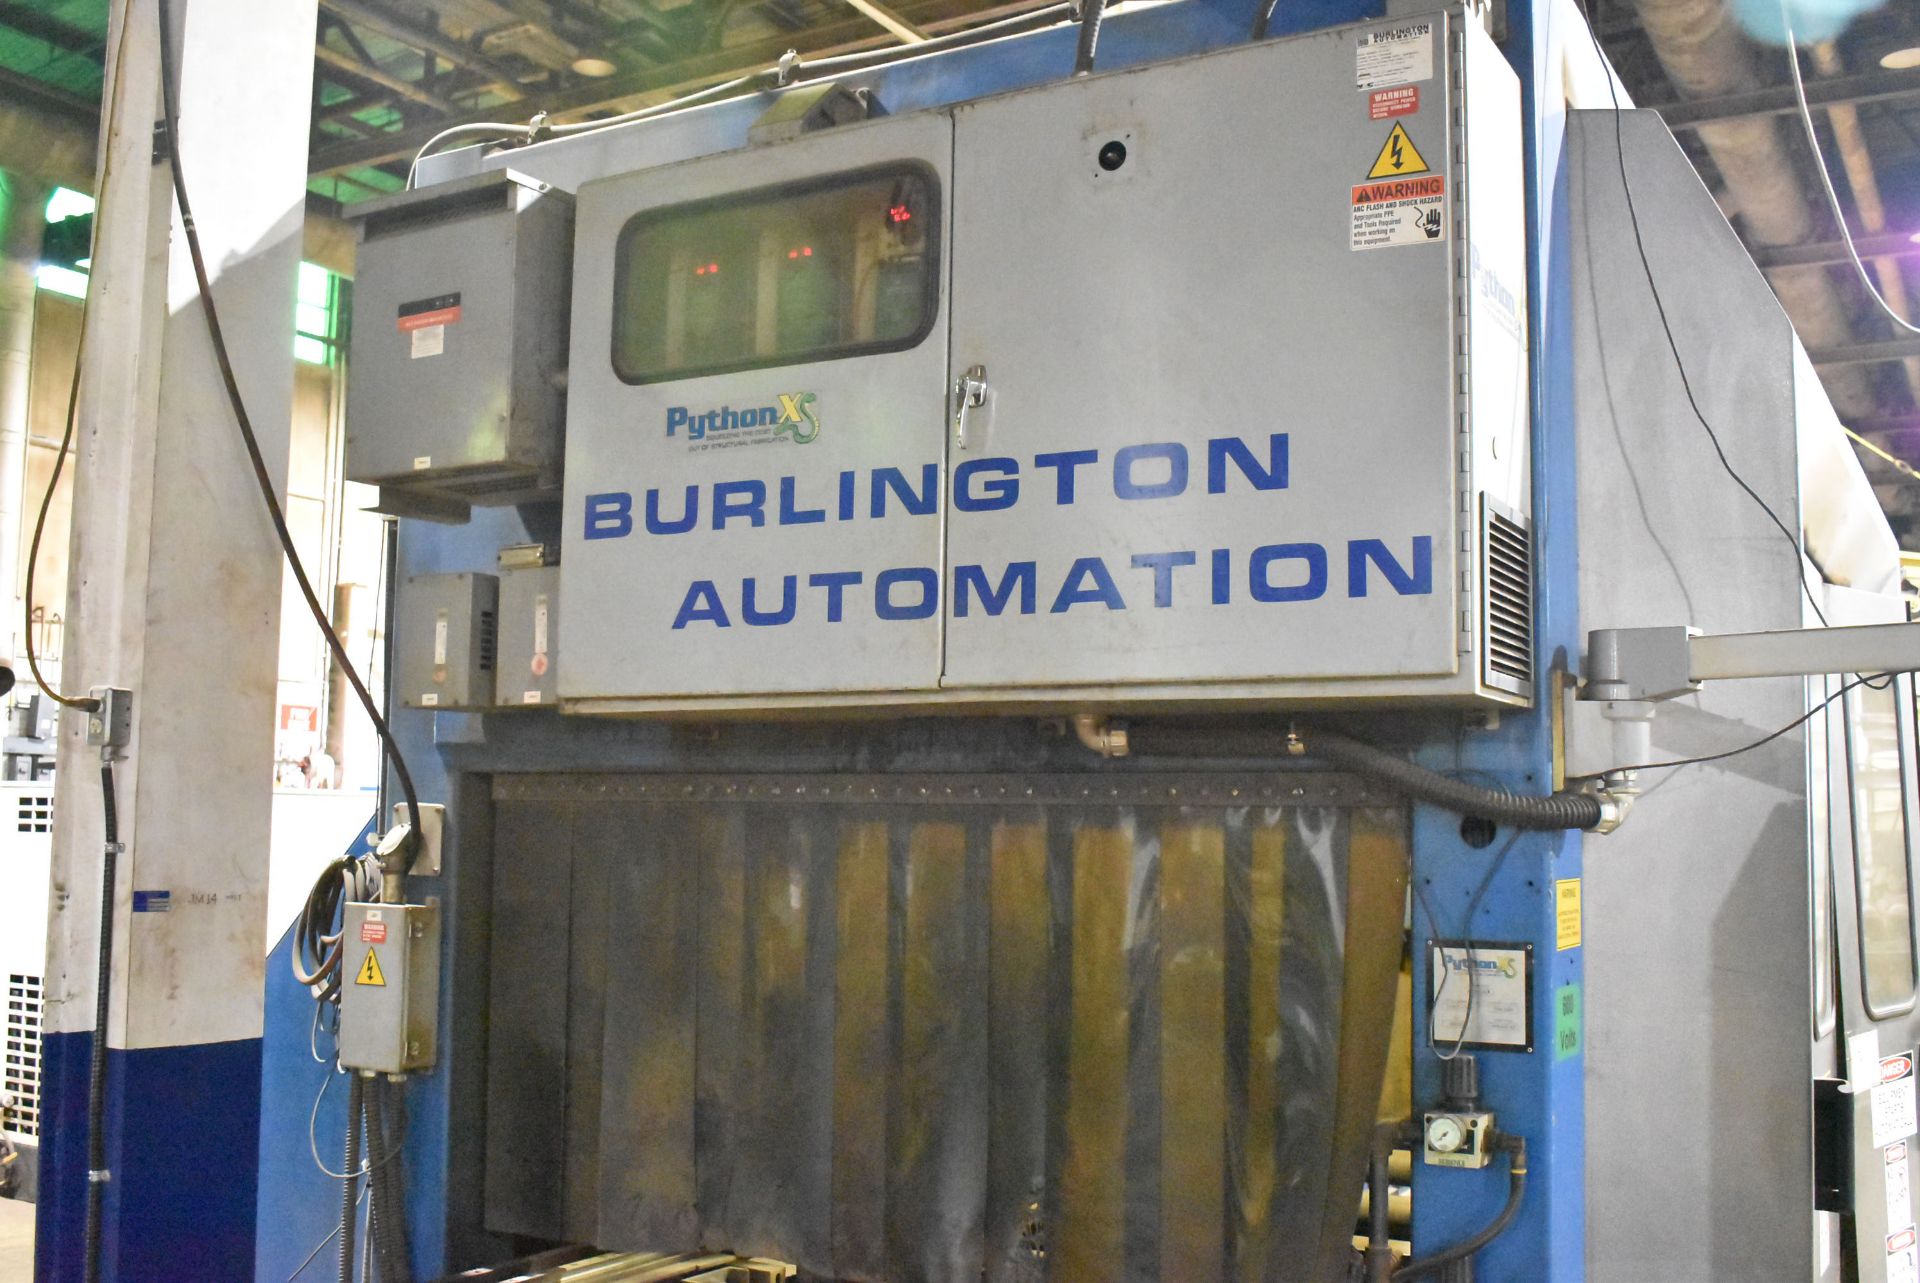 LINCOLN ELECTRIC (2009) PYTHON X ROBOTIC 6-AXIS CNC PLASMA CUTTING SYSTEM WITH BURLINGTON AUTOMATION - Image 4 of 8